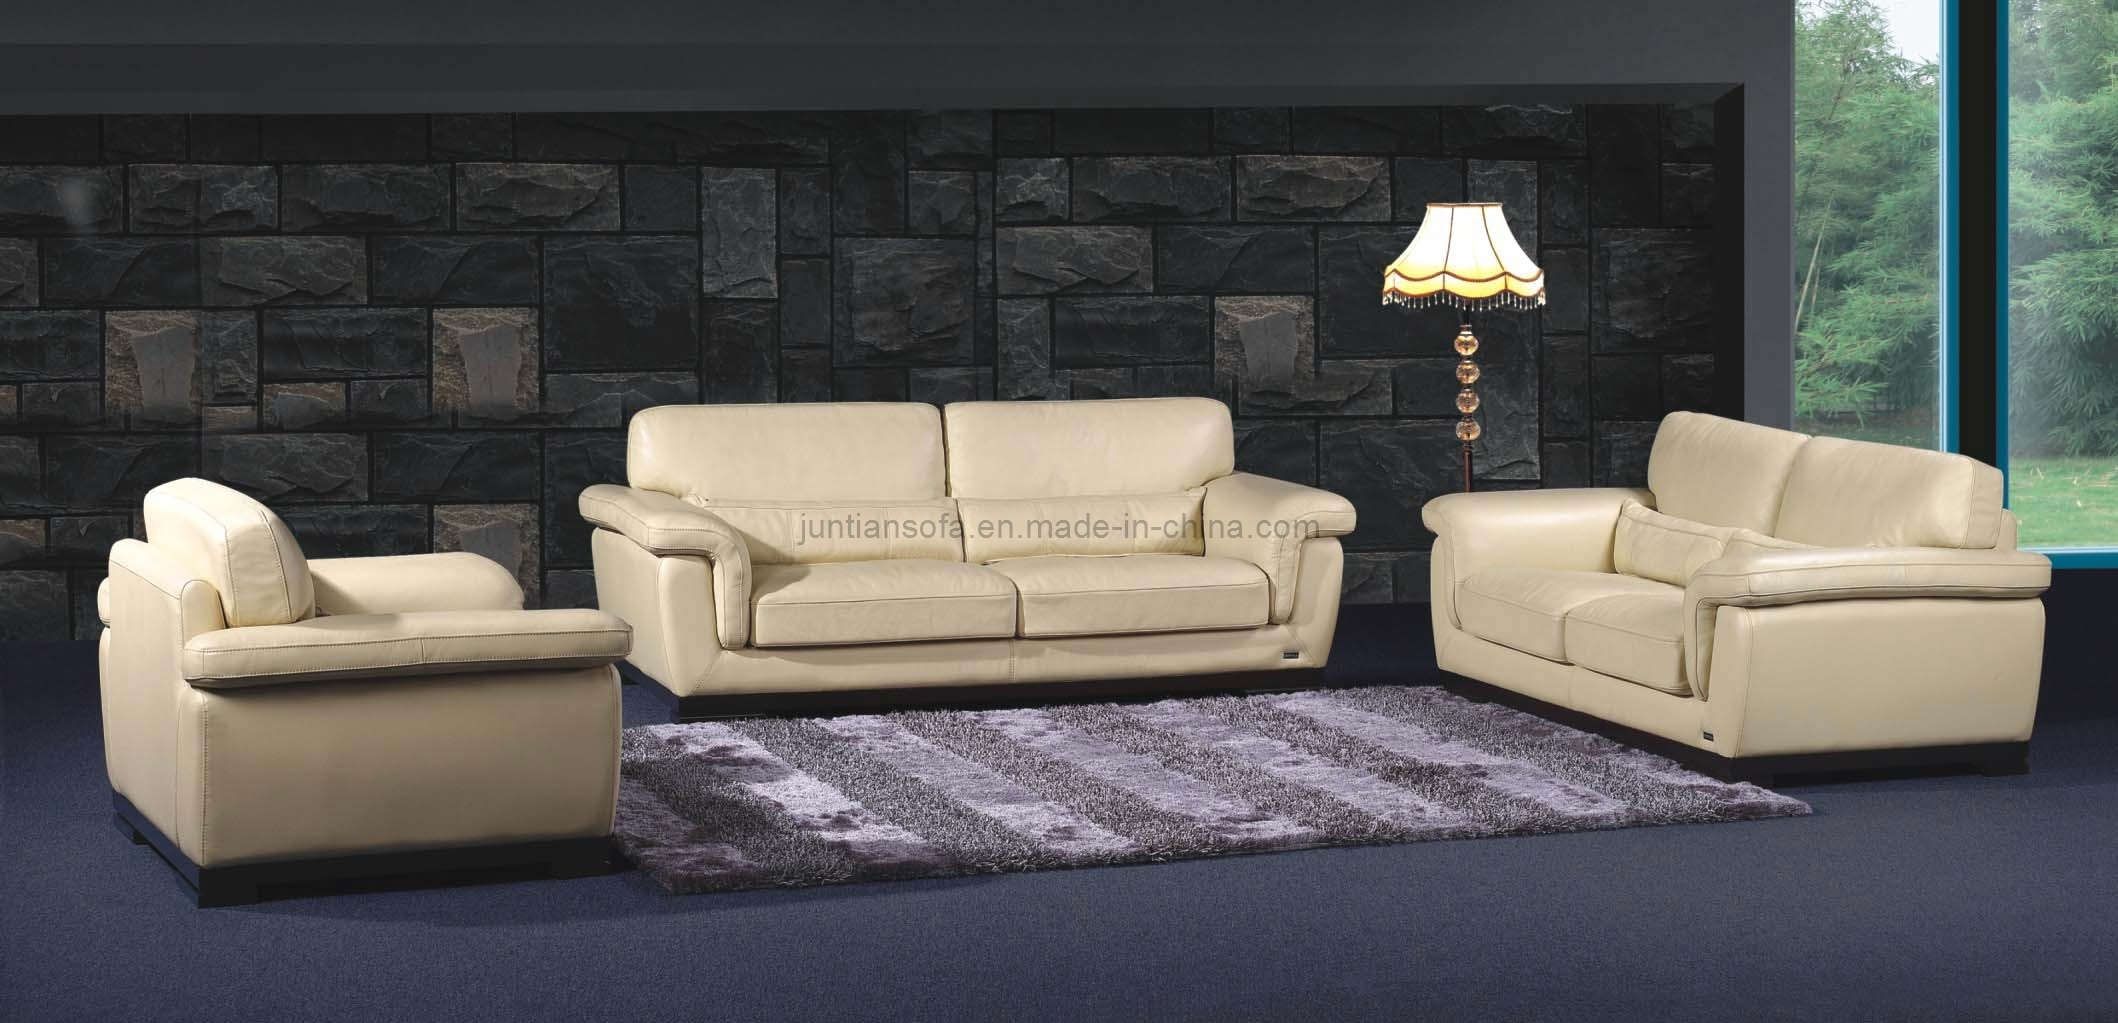 Lovely High Quality Sectional Sofa 30 For Sofa Room Ideas With High Throughout Good Quality Sectional Sofas (Photo 1 of 10)